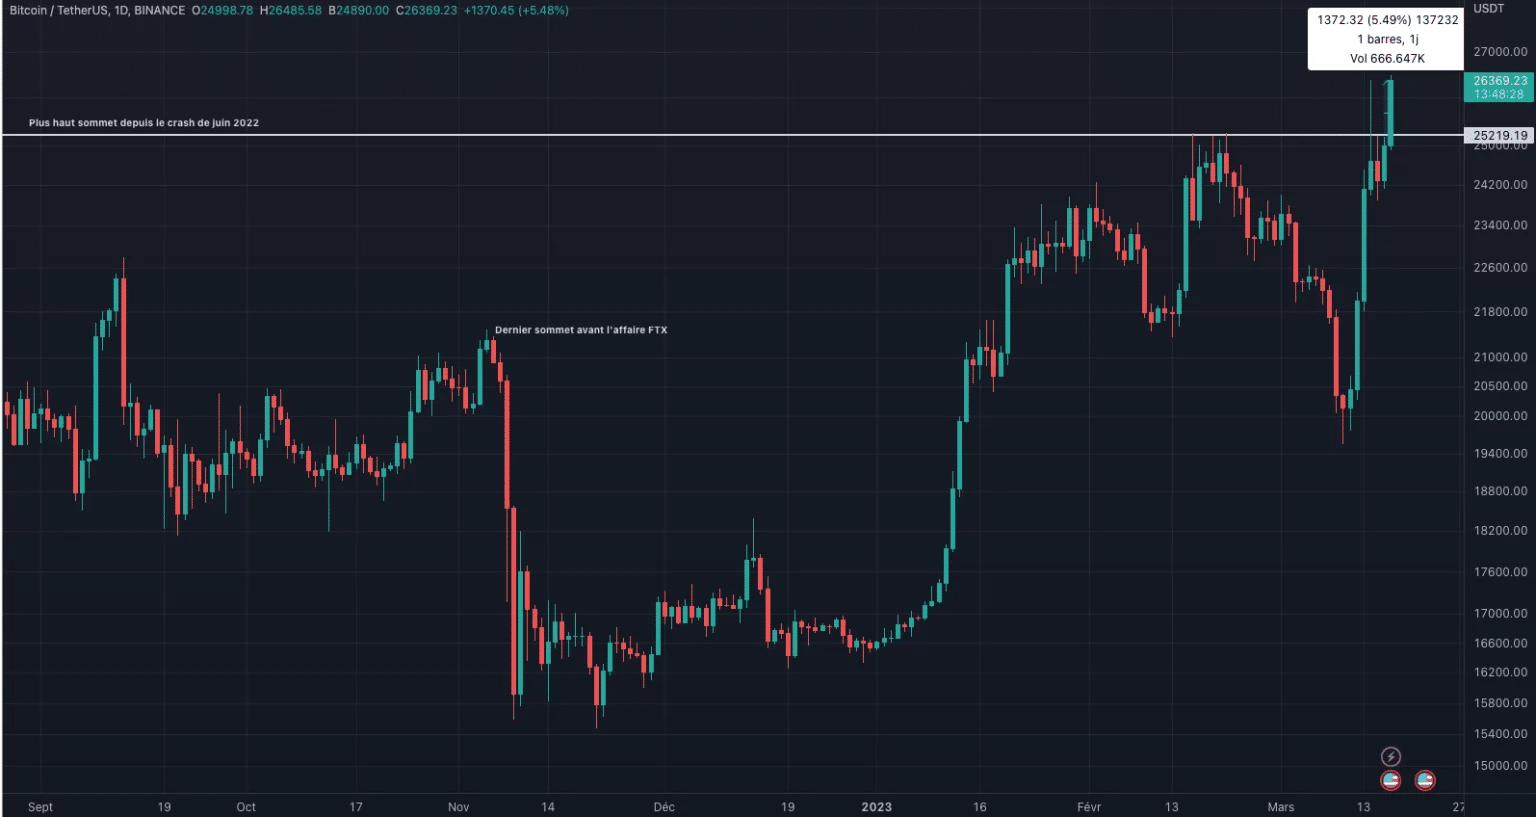 Bitcoin (BTC) price trend in daily scale